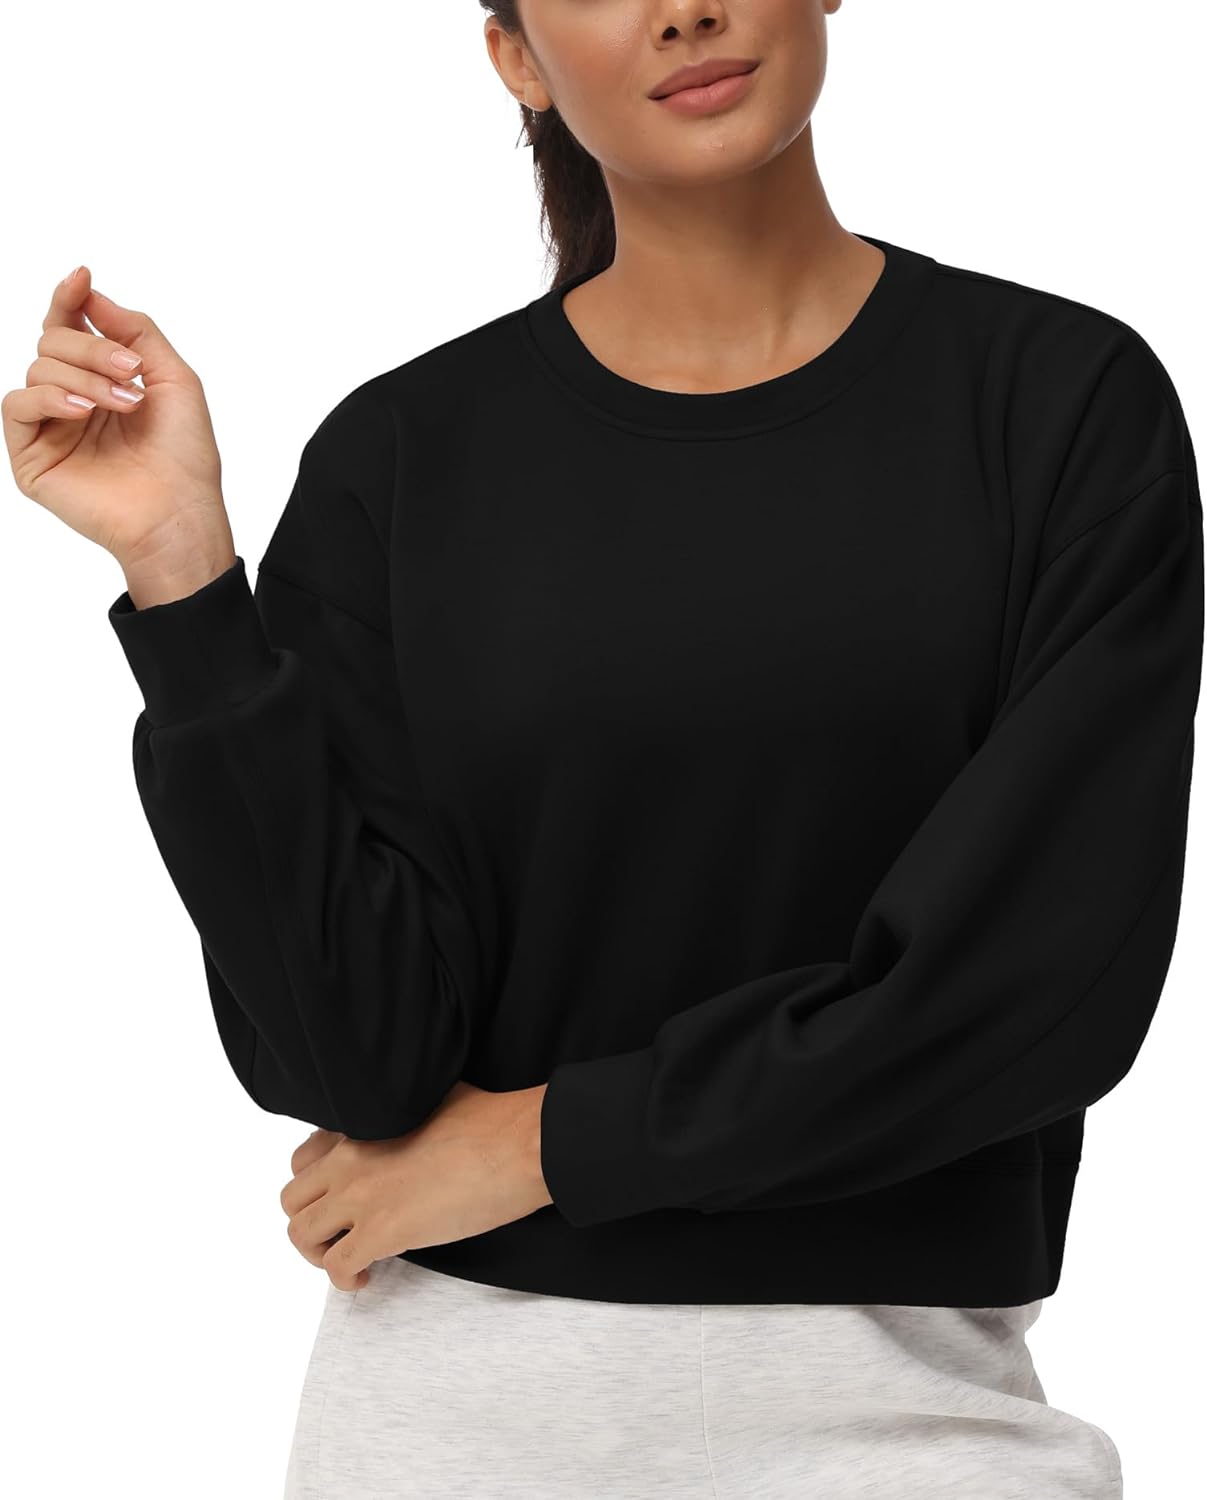 THE GYM PEOPLE Women's Crewneck Cropped Pullover Sweatshirt Cute Basic Long  Sleeves Workout Tops(Black) - The Gym People